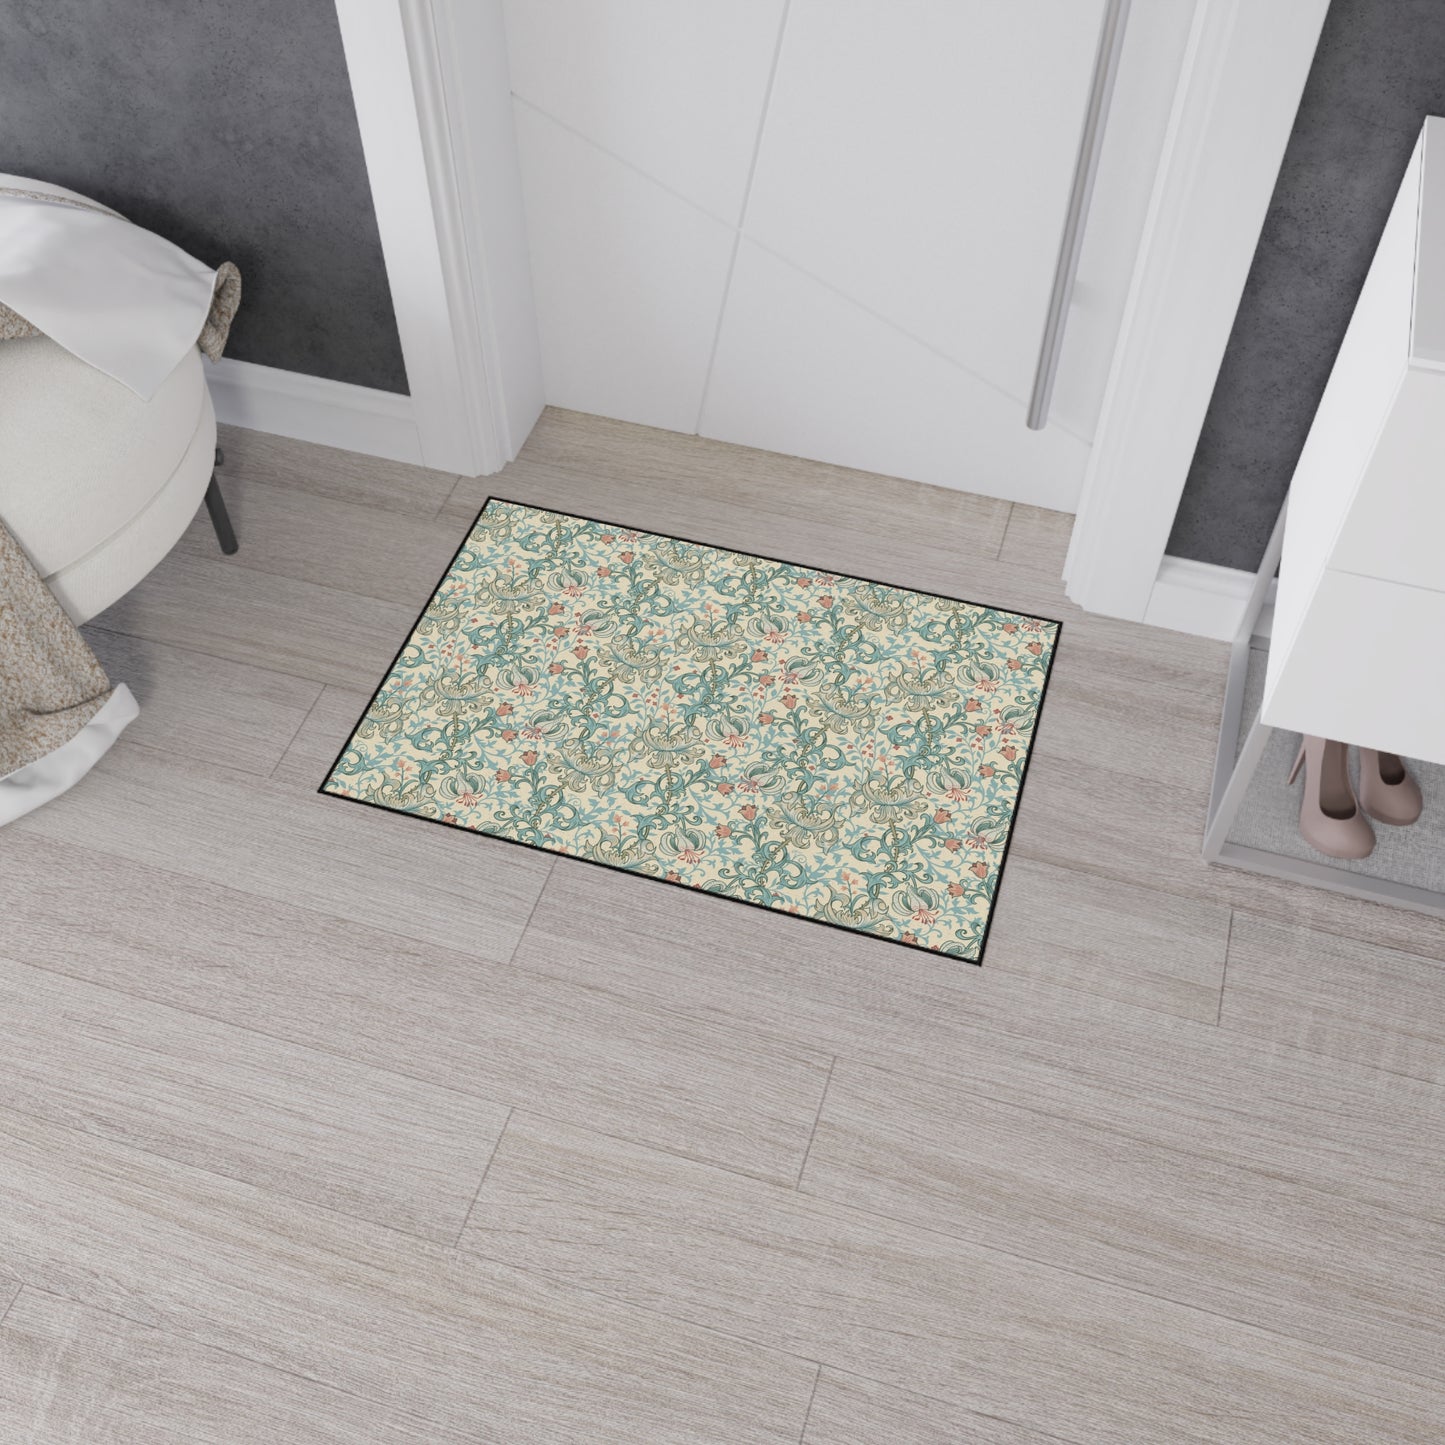 william-morris-co-heavy-duty-floor-mat-golden-lily-collection-mineral-13